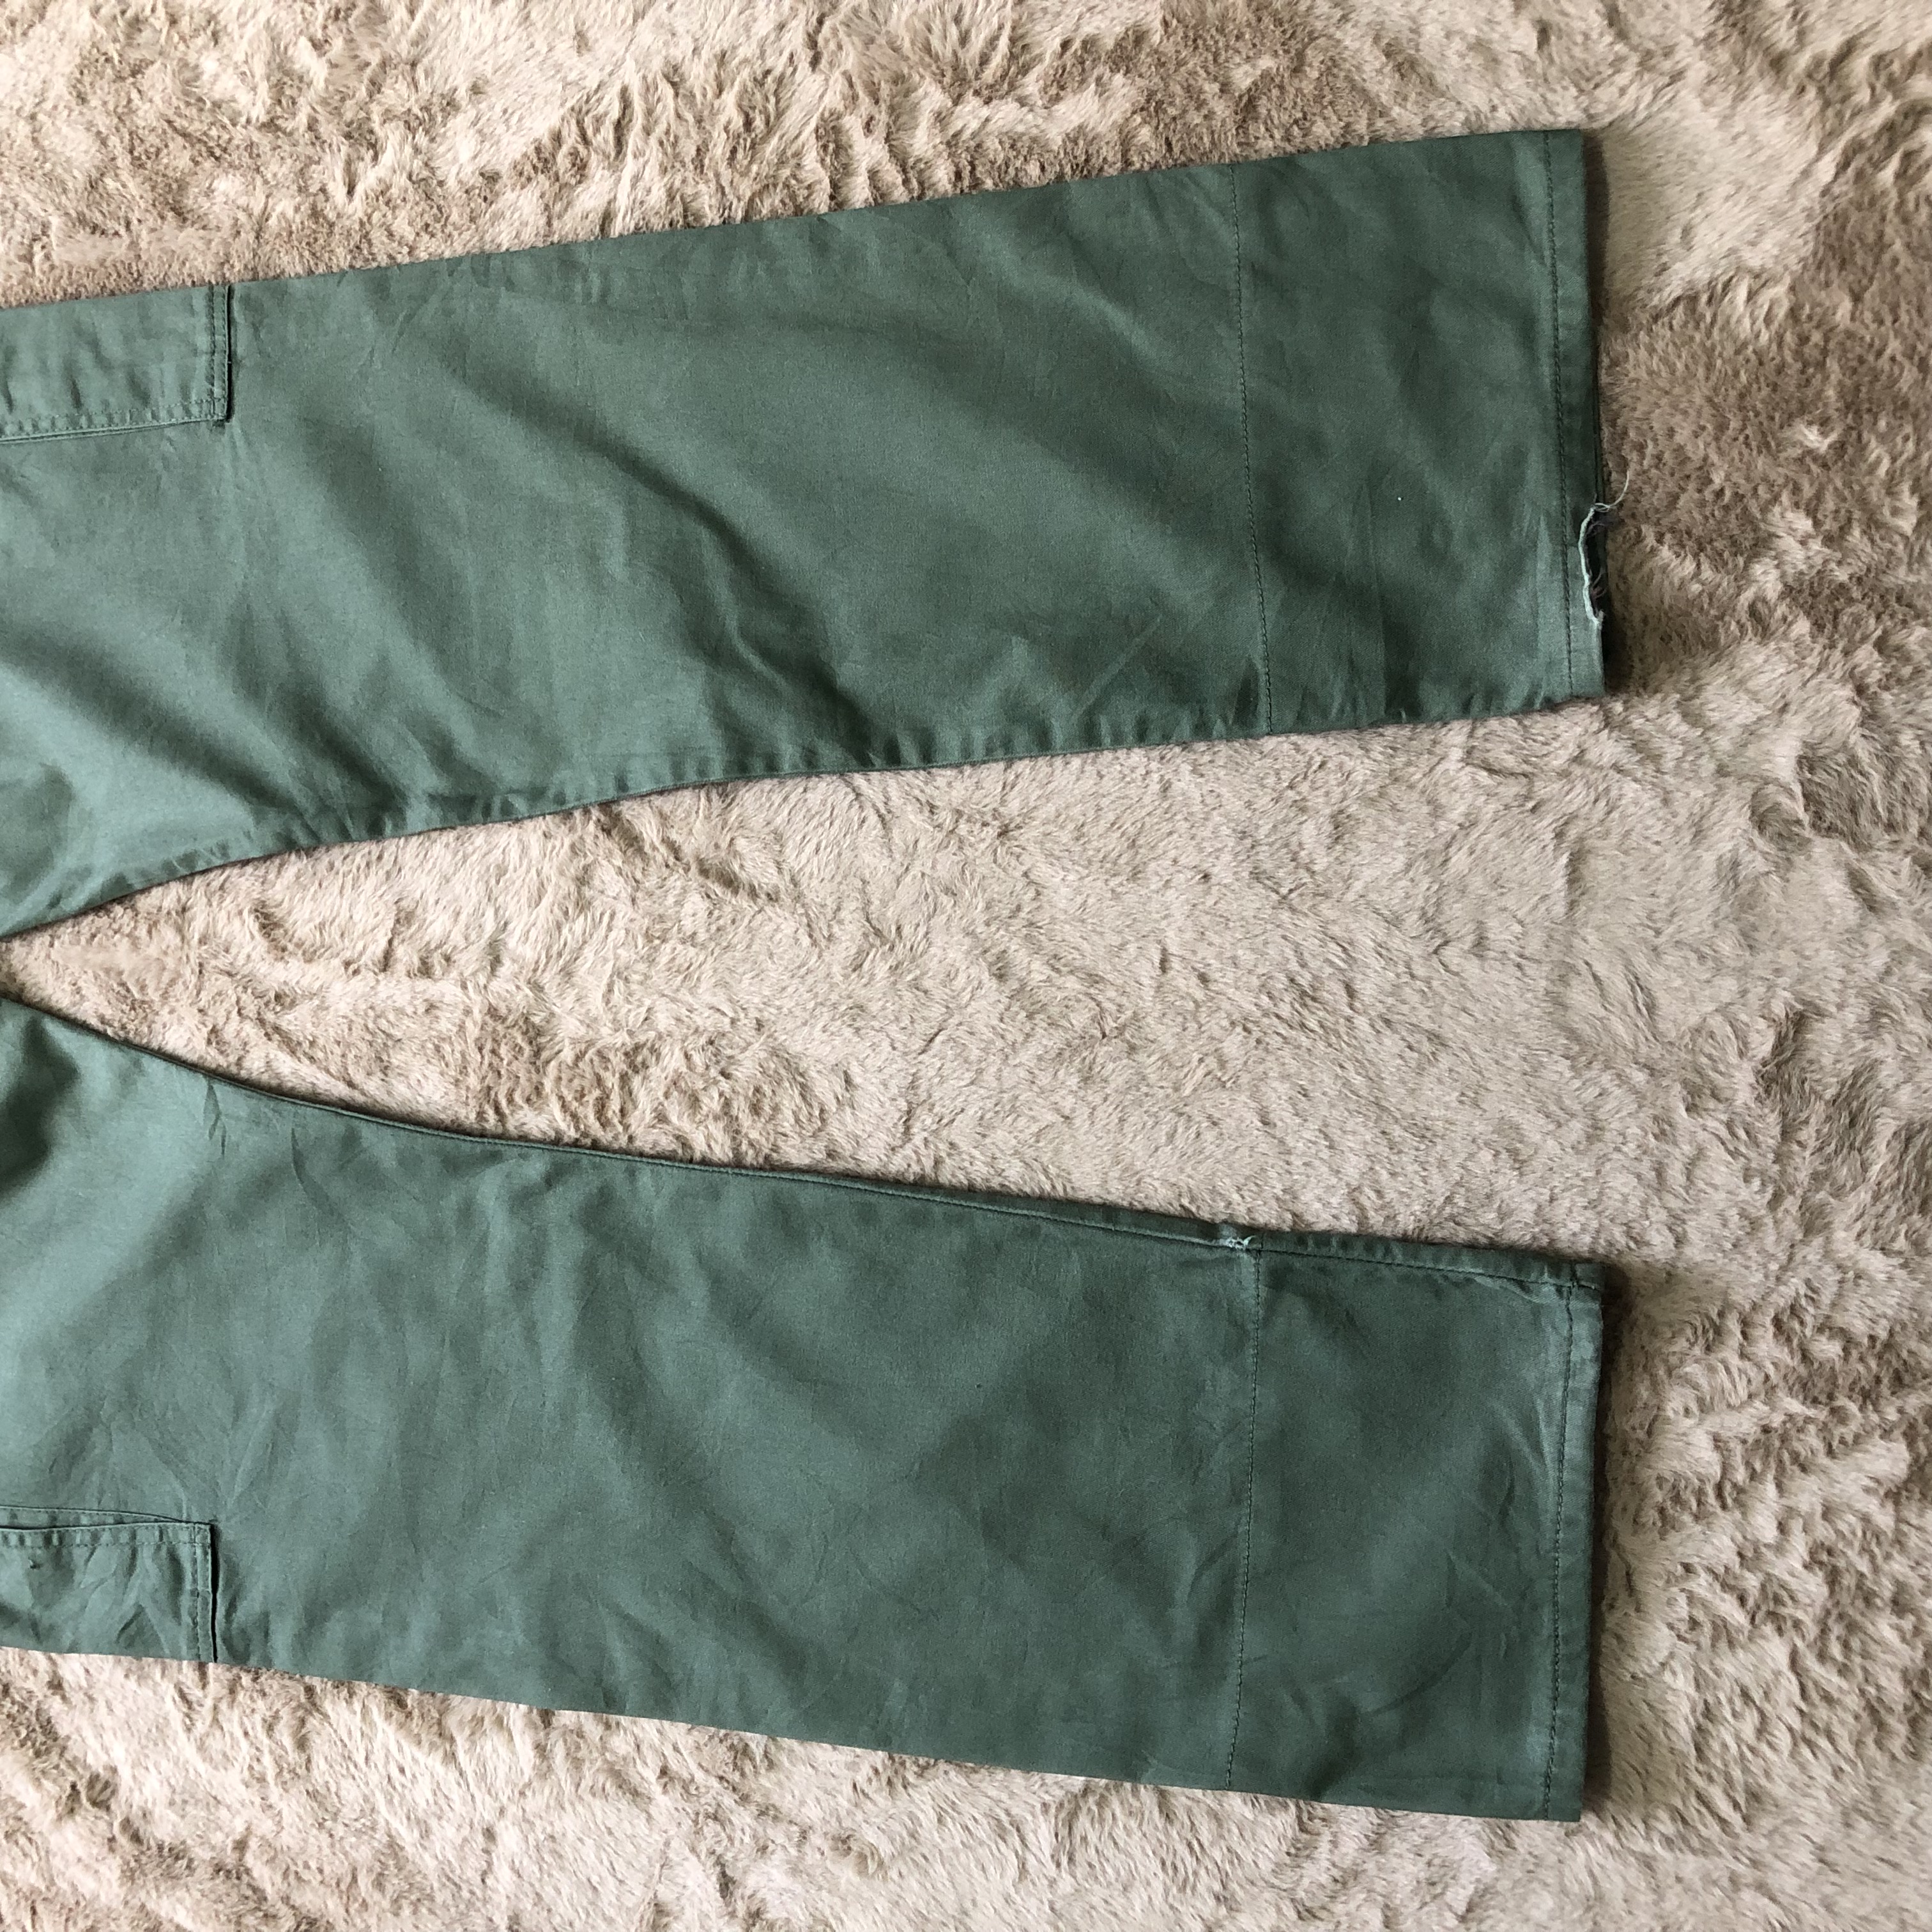 Japanese Brand - Plus One Military Army Style Cargo Pants 6 Pocket #4289-149 - 15